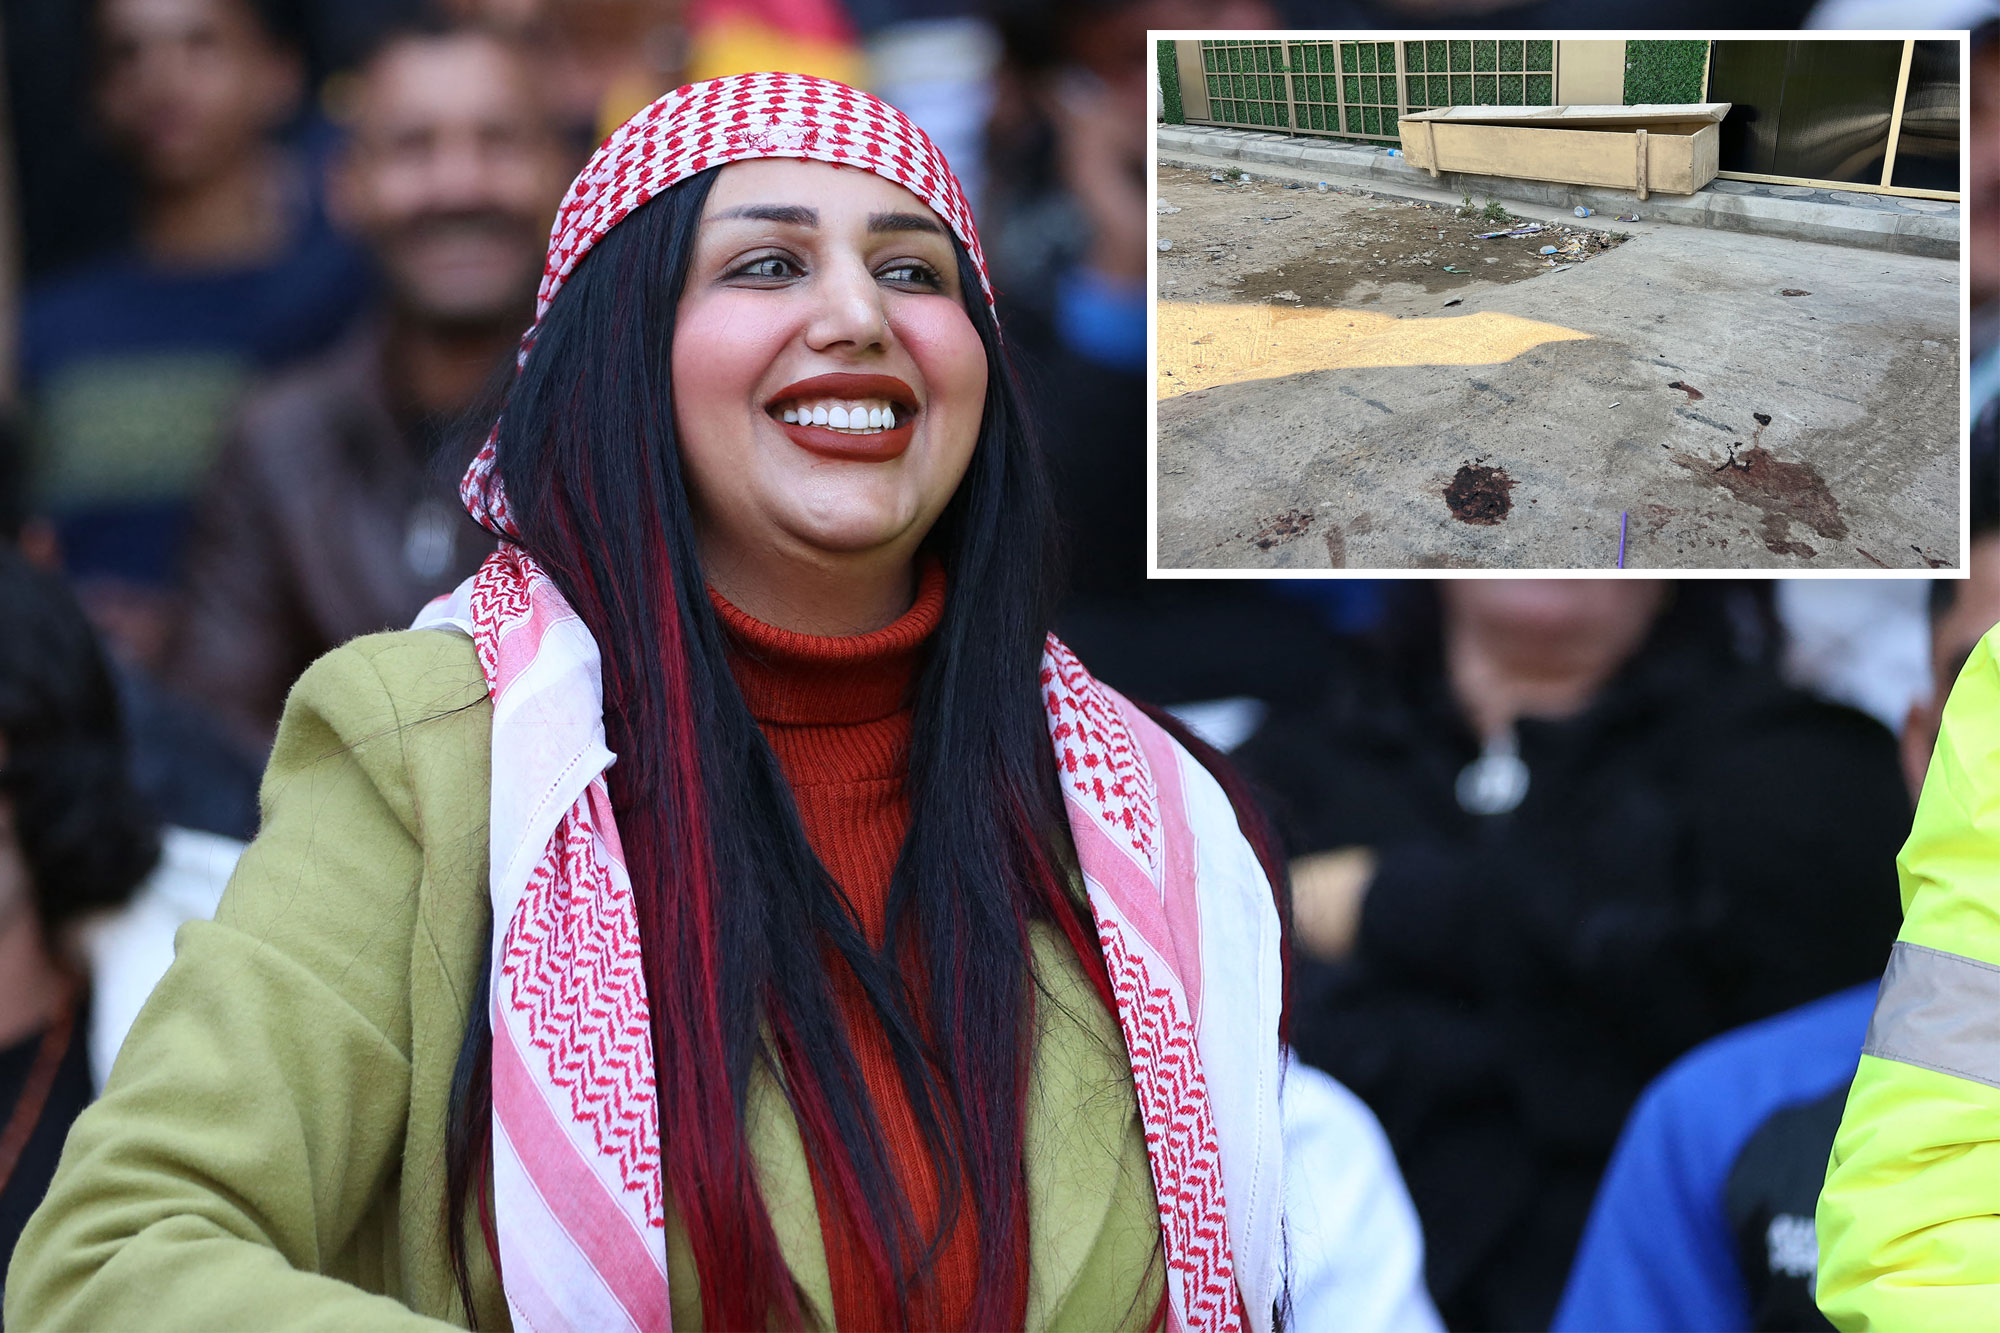 TikTok influencer Ghufran Sawadi, aka Om Fahad, seen smiling wearing cultural scarf on head with a crowd behind her; inset of the spot outside her home where she was killed, where blood was left visible on the ground.